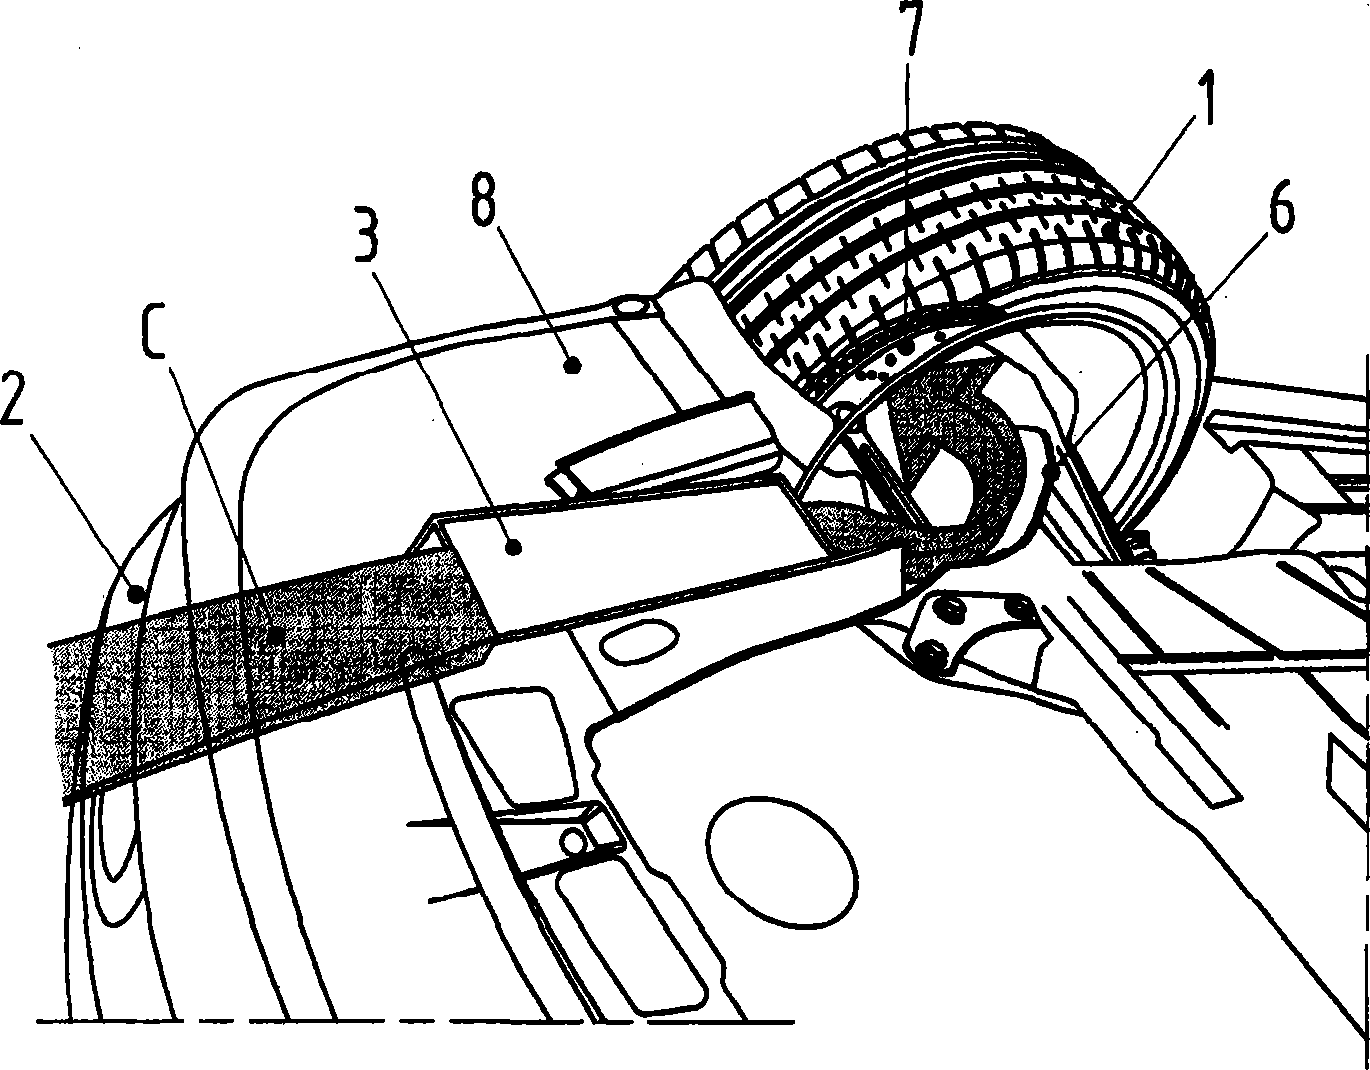 Vehicle with front area